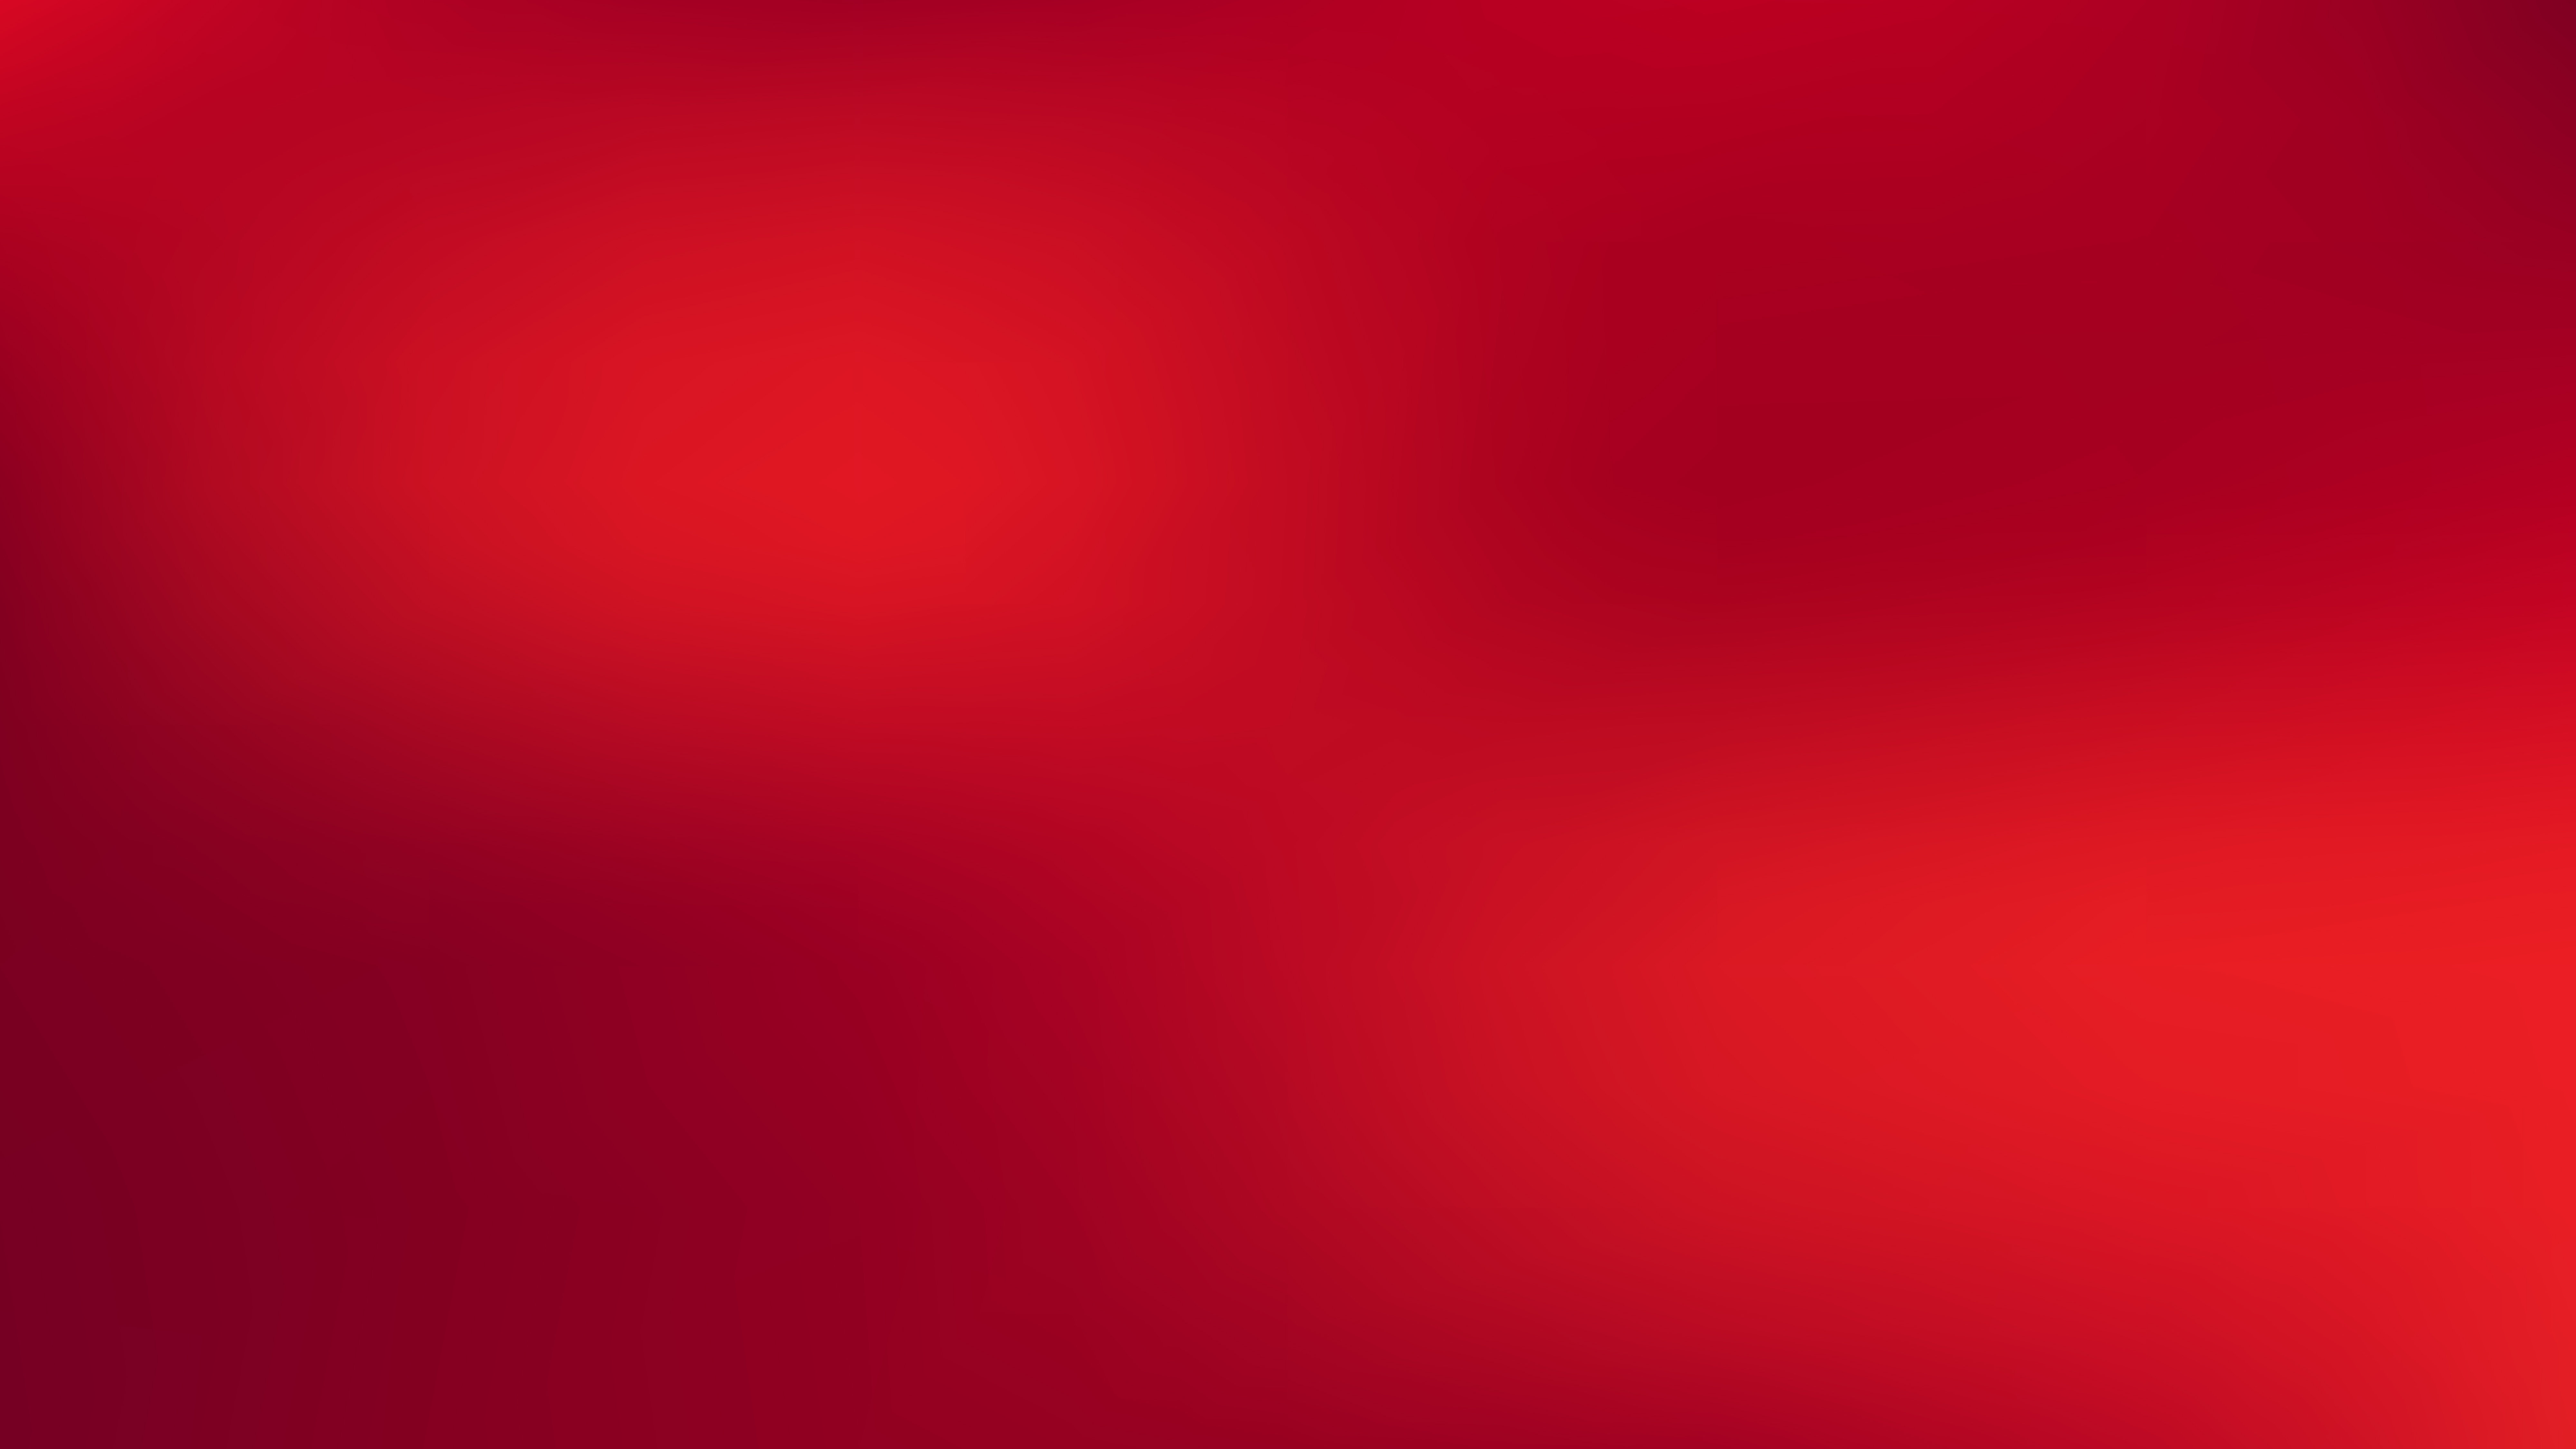 Free Red Blank background